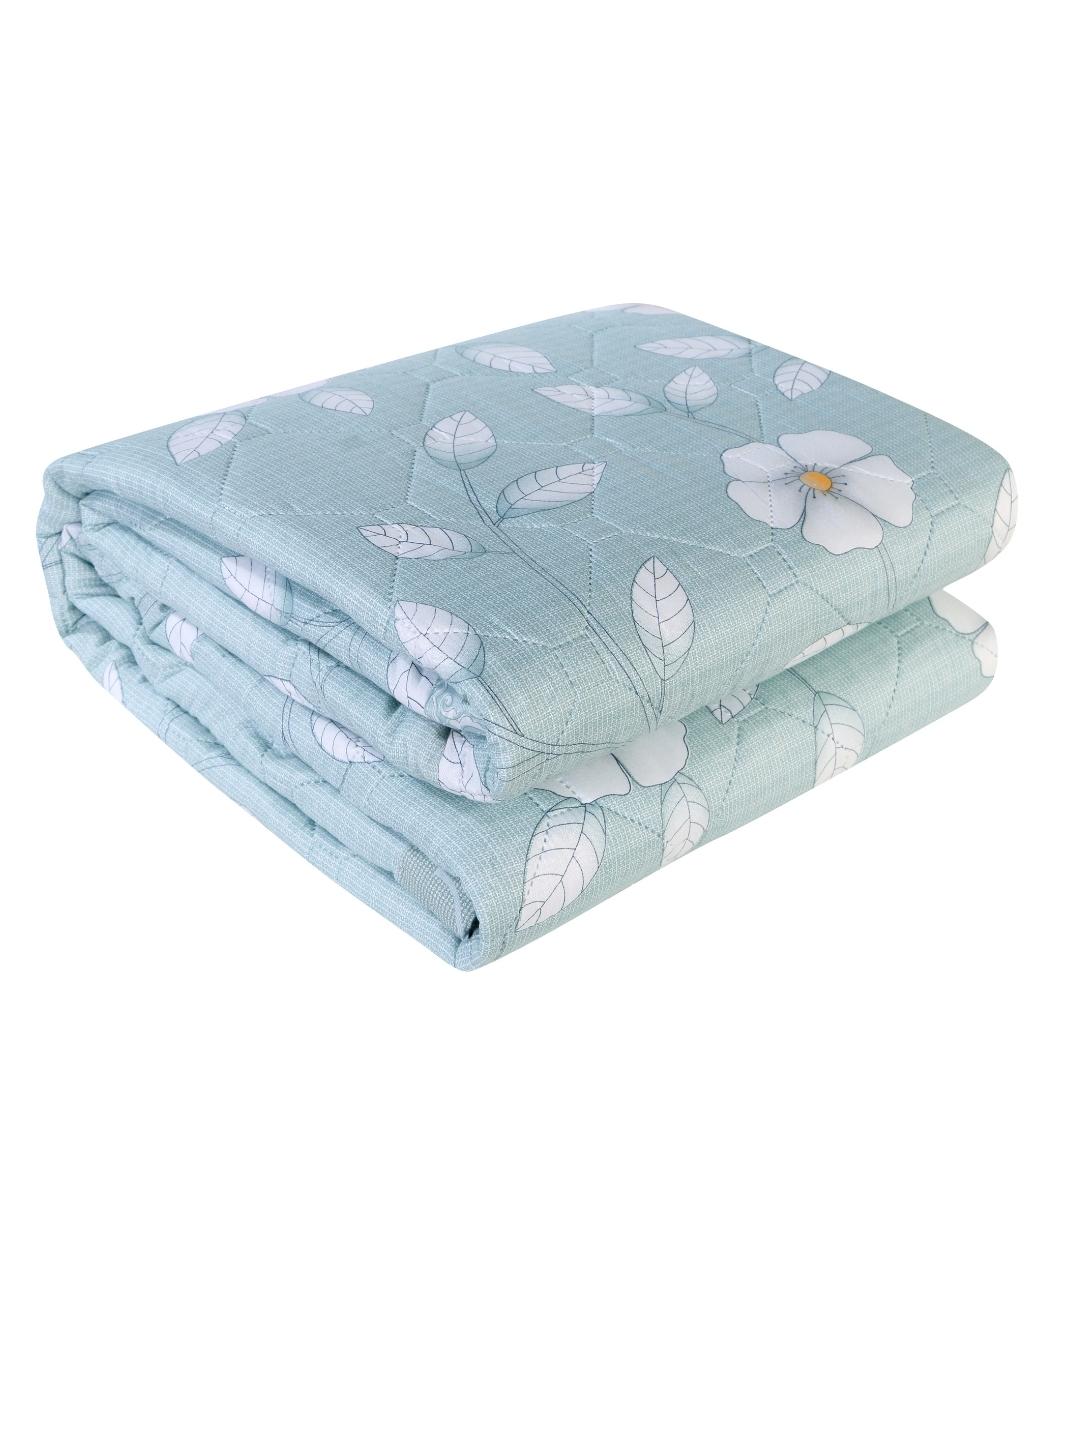 Floral Print Double Bed Light Weight Comforter- Sea Green